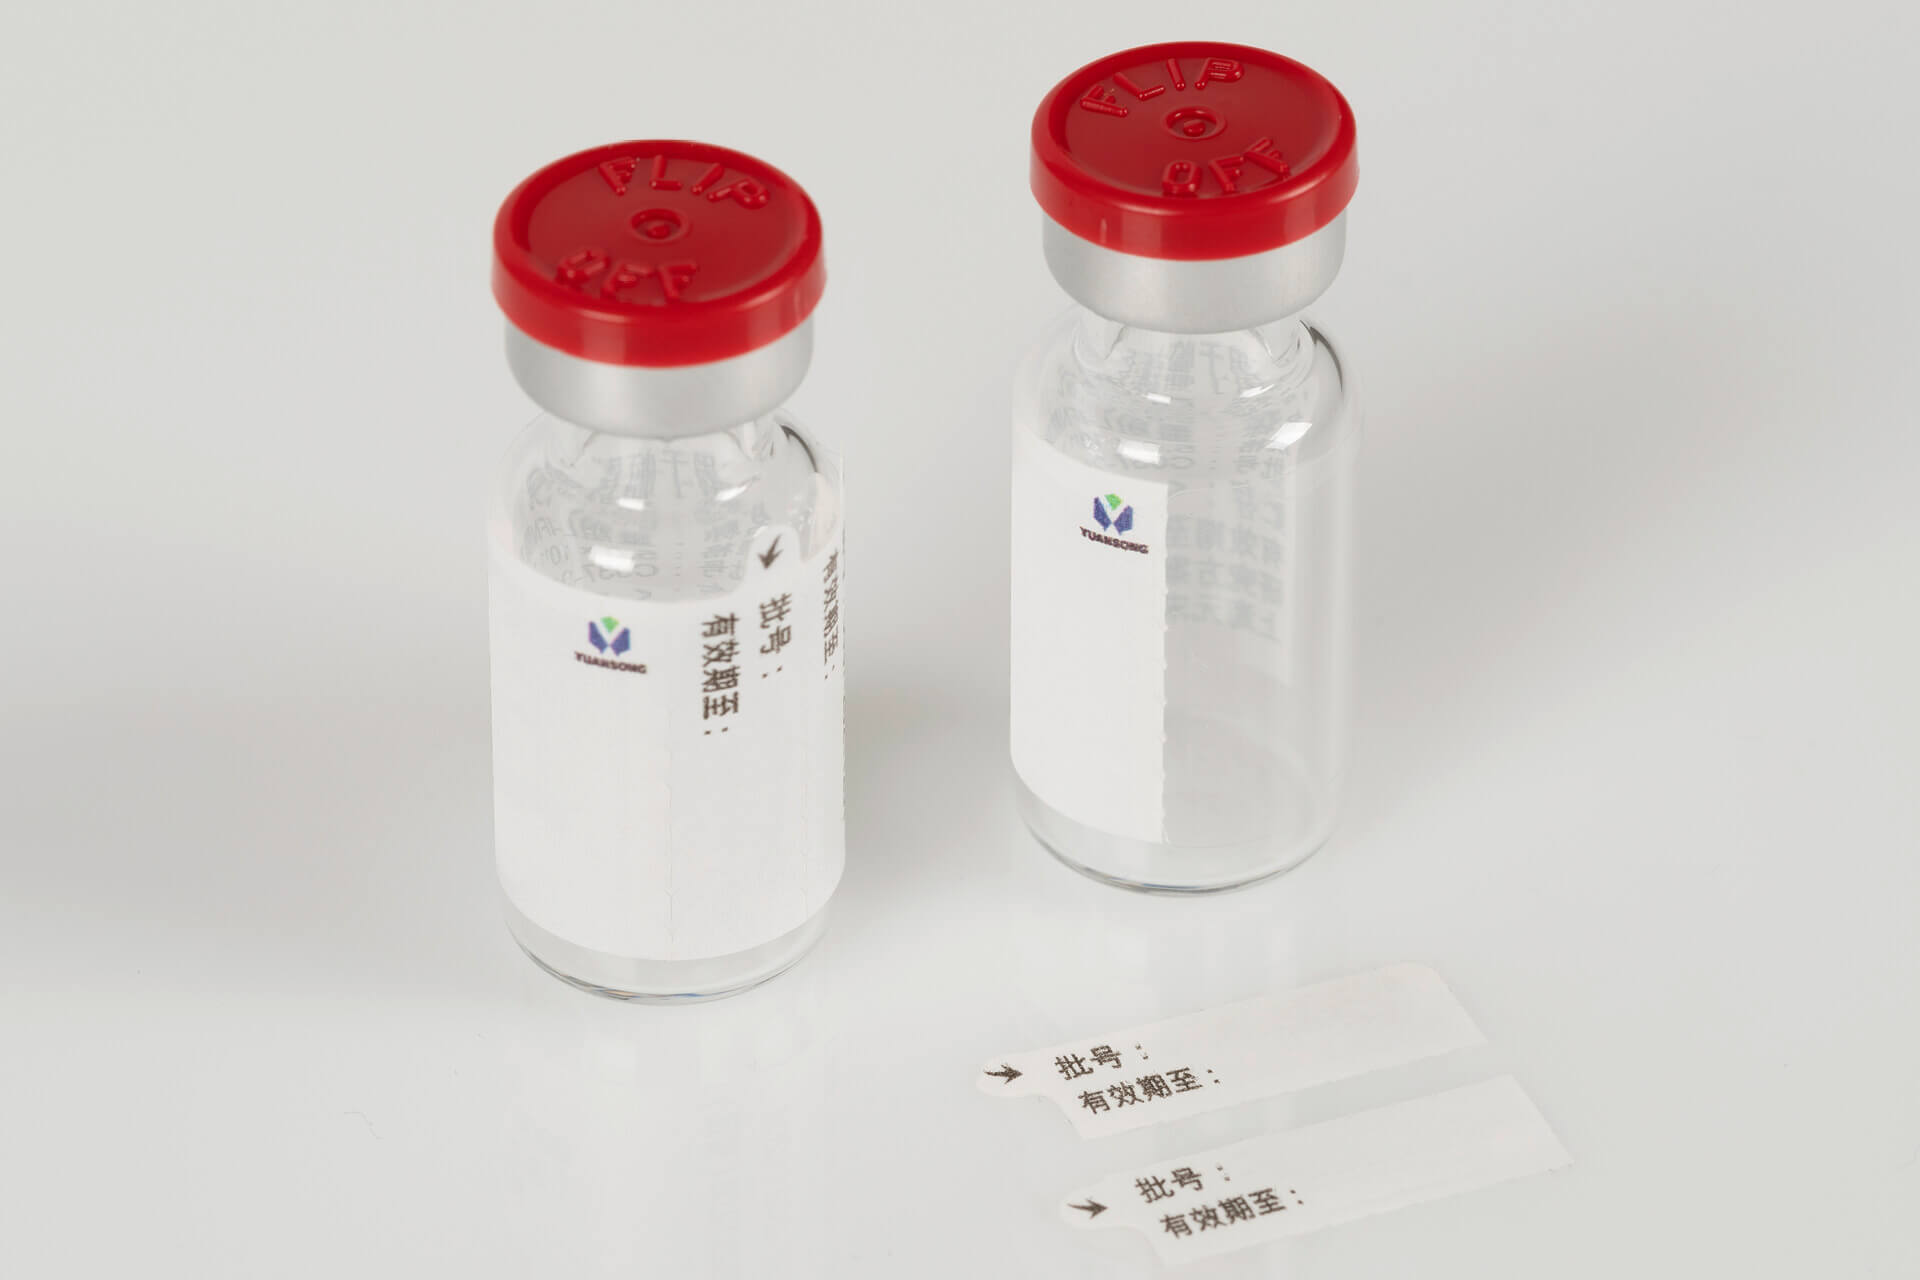 The Pharma-Comb IL Label with detachable labels is temperature-stable, multifunctional, and provided with an integrated inspection window.